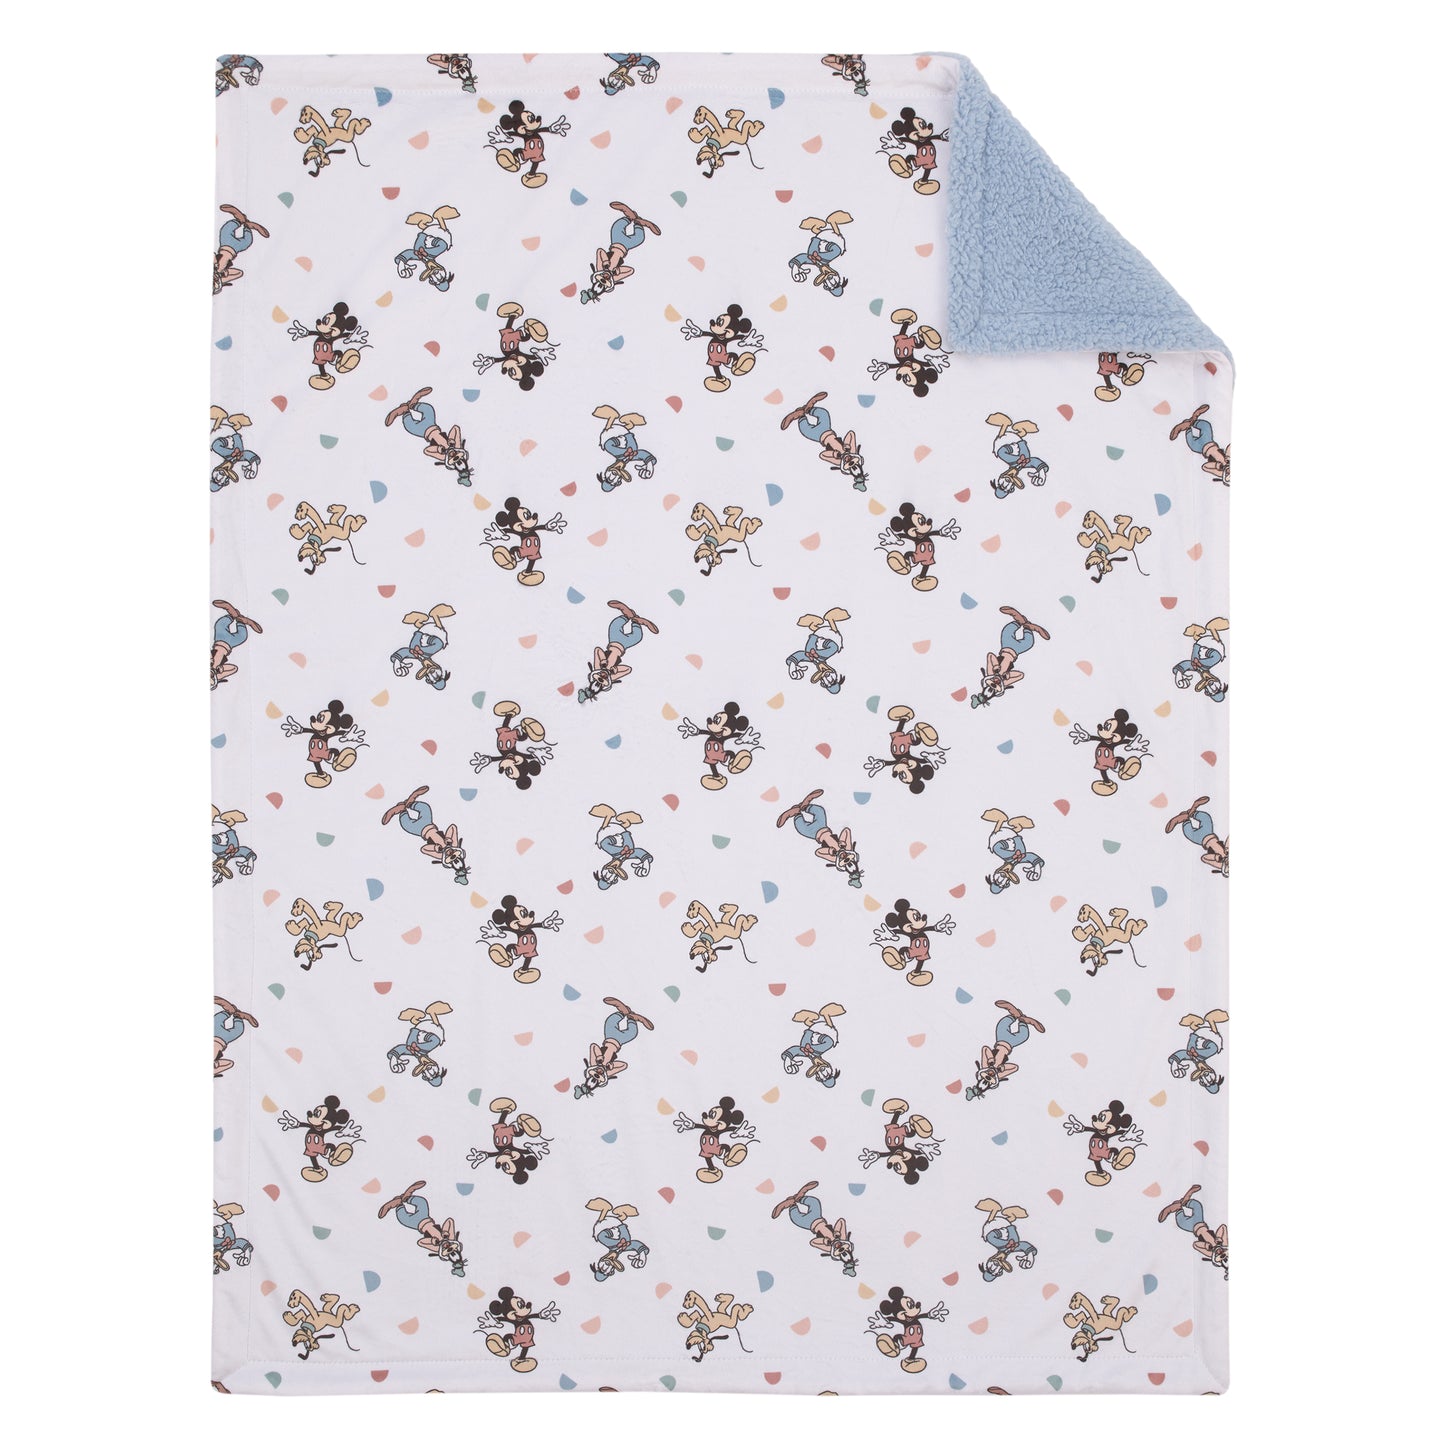 Disney Mickey Mouse Light Blue, White, and Tan Super Soft Sherpa Baby Blanket with Donald Duck, Goofy and Pluto